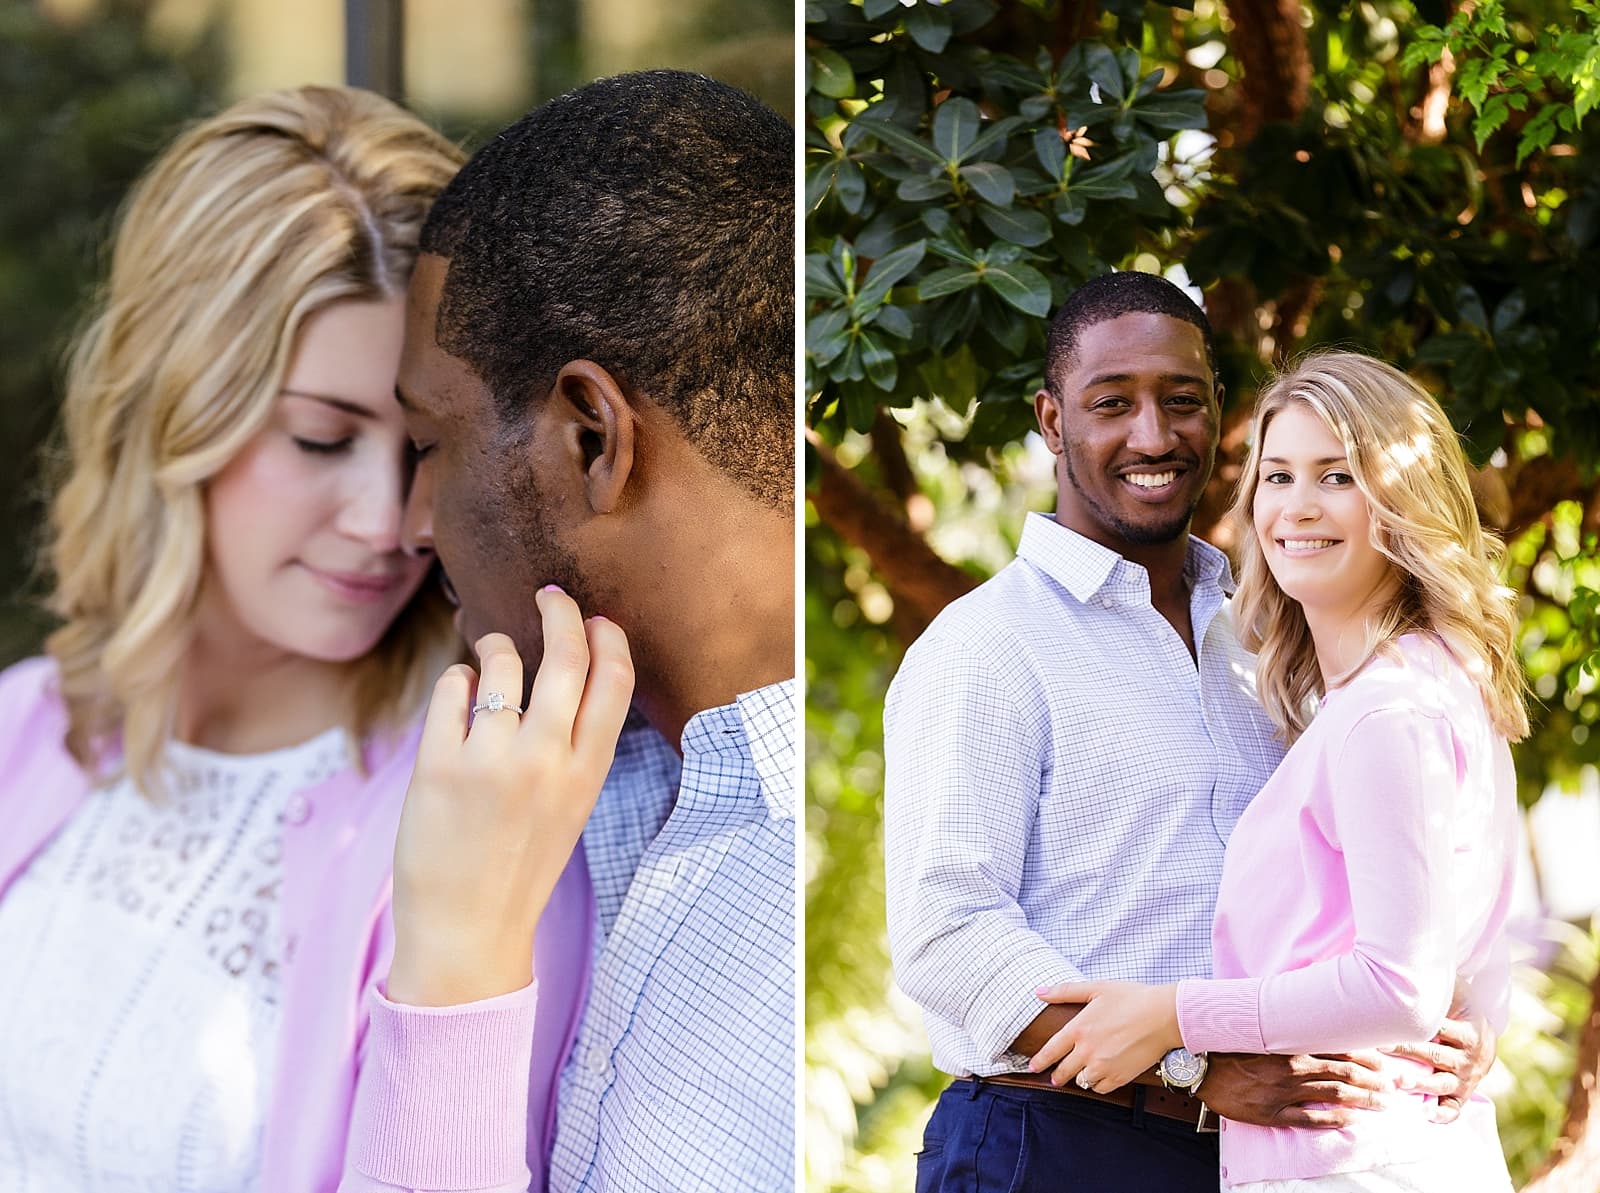 Longwood Gardens engagement session, couple embracing and hugging, intimate engagement portriats